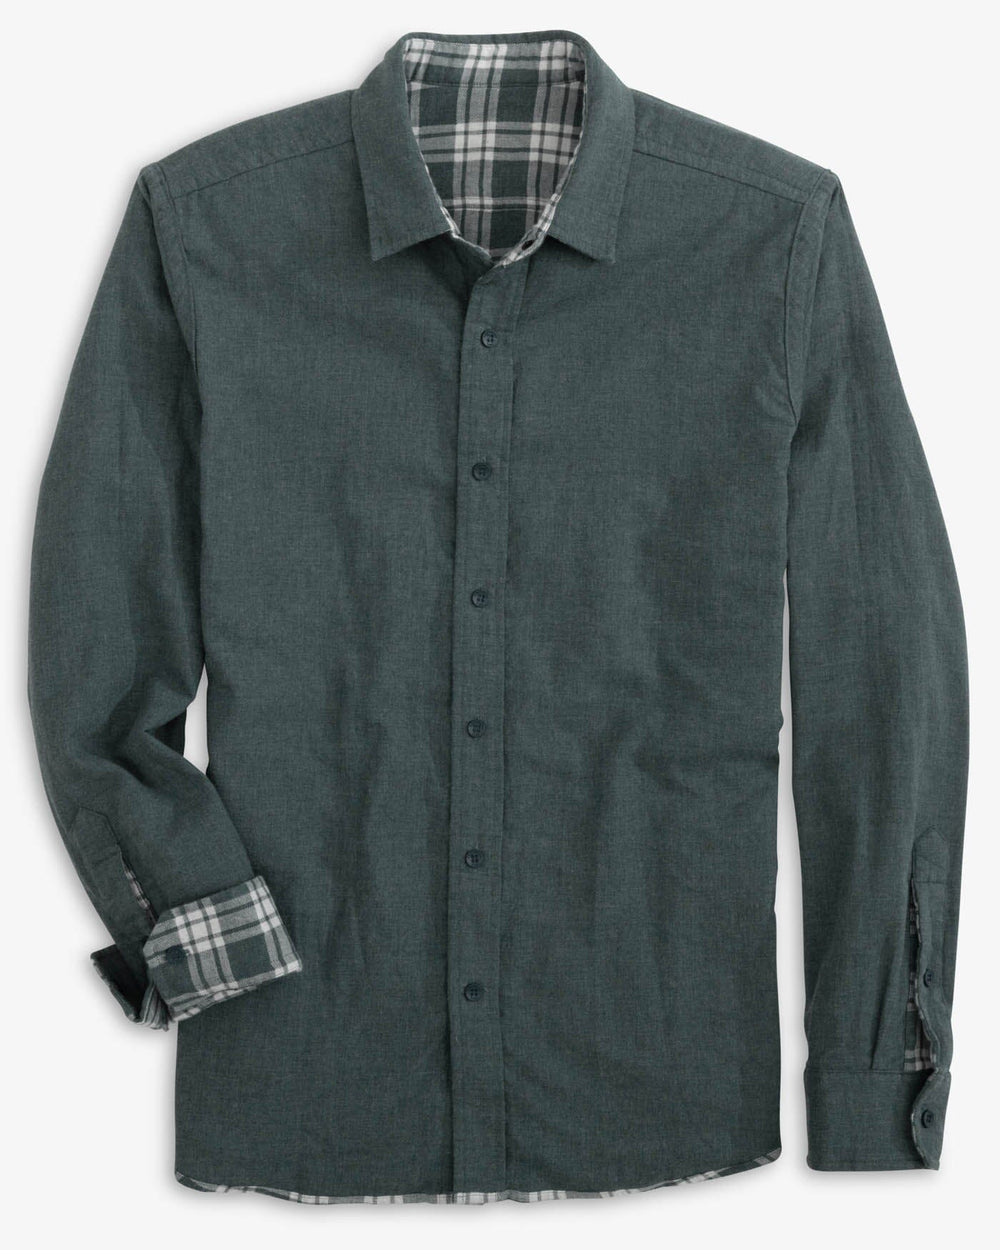 The reverse view of the Southern Tide Heather Melbourne Reversible Plaid Sport Shirt by Southern Tide - Heather Dark Slate